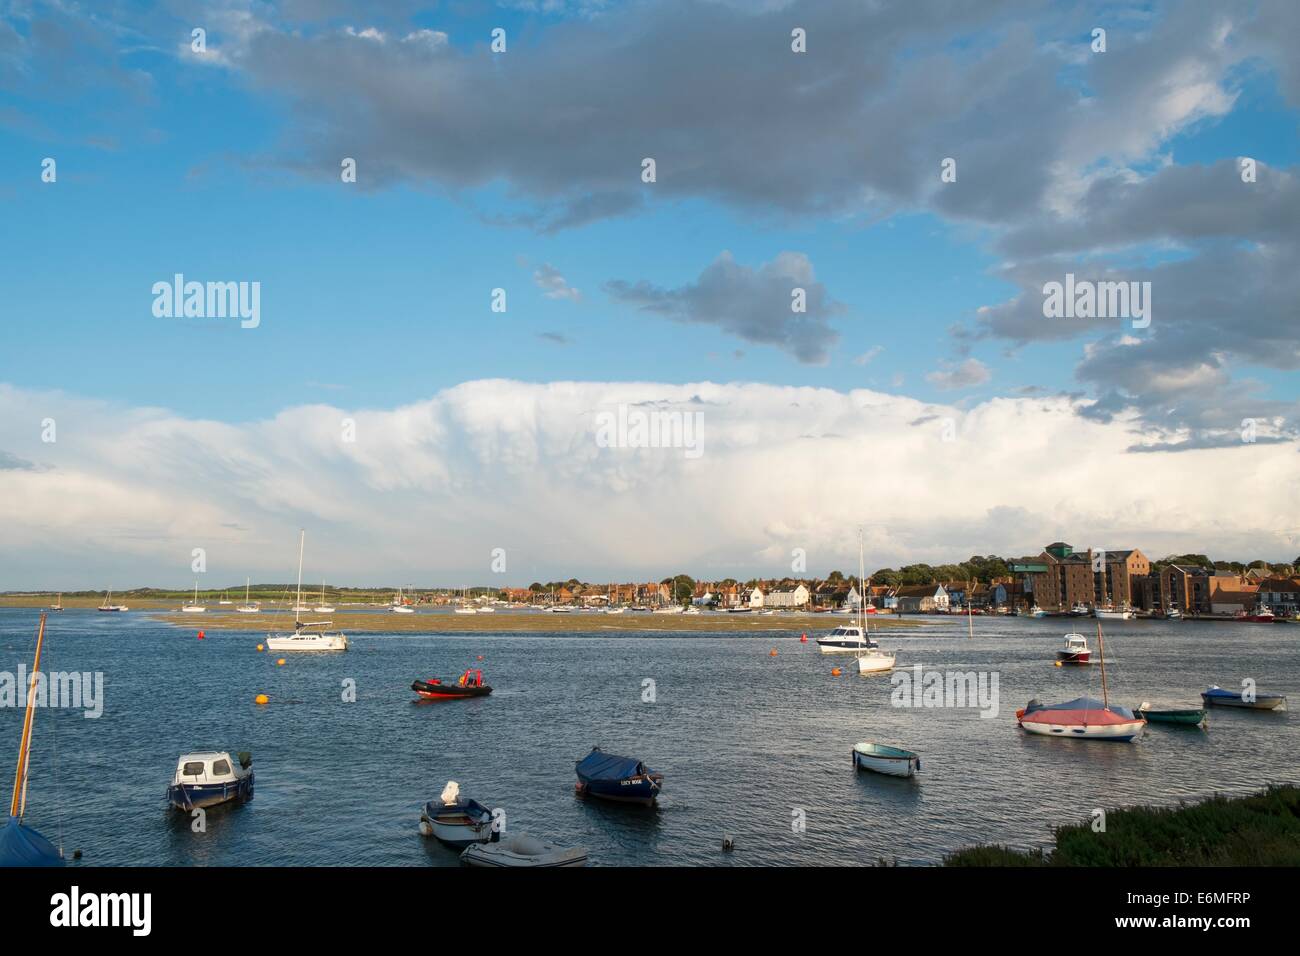 View of Well Harbour with dramtic skies and storm clouds, Stock Photo